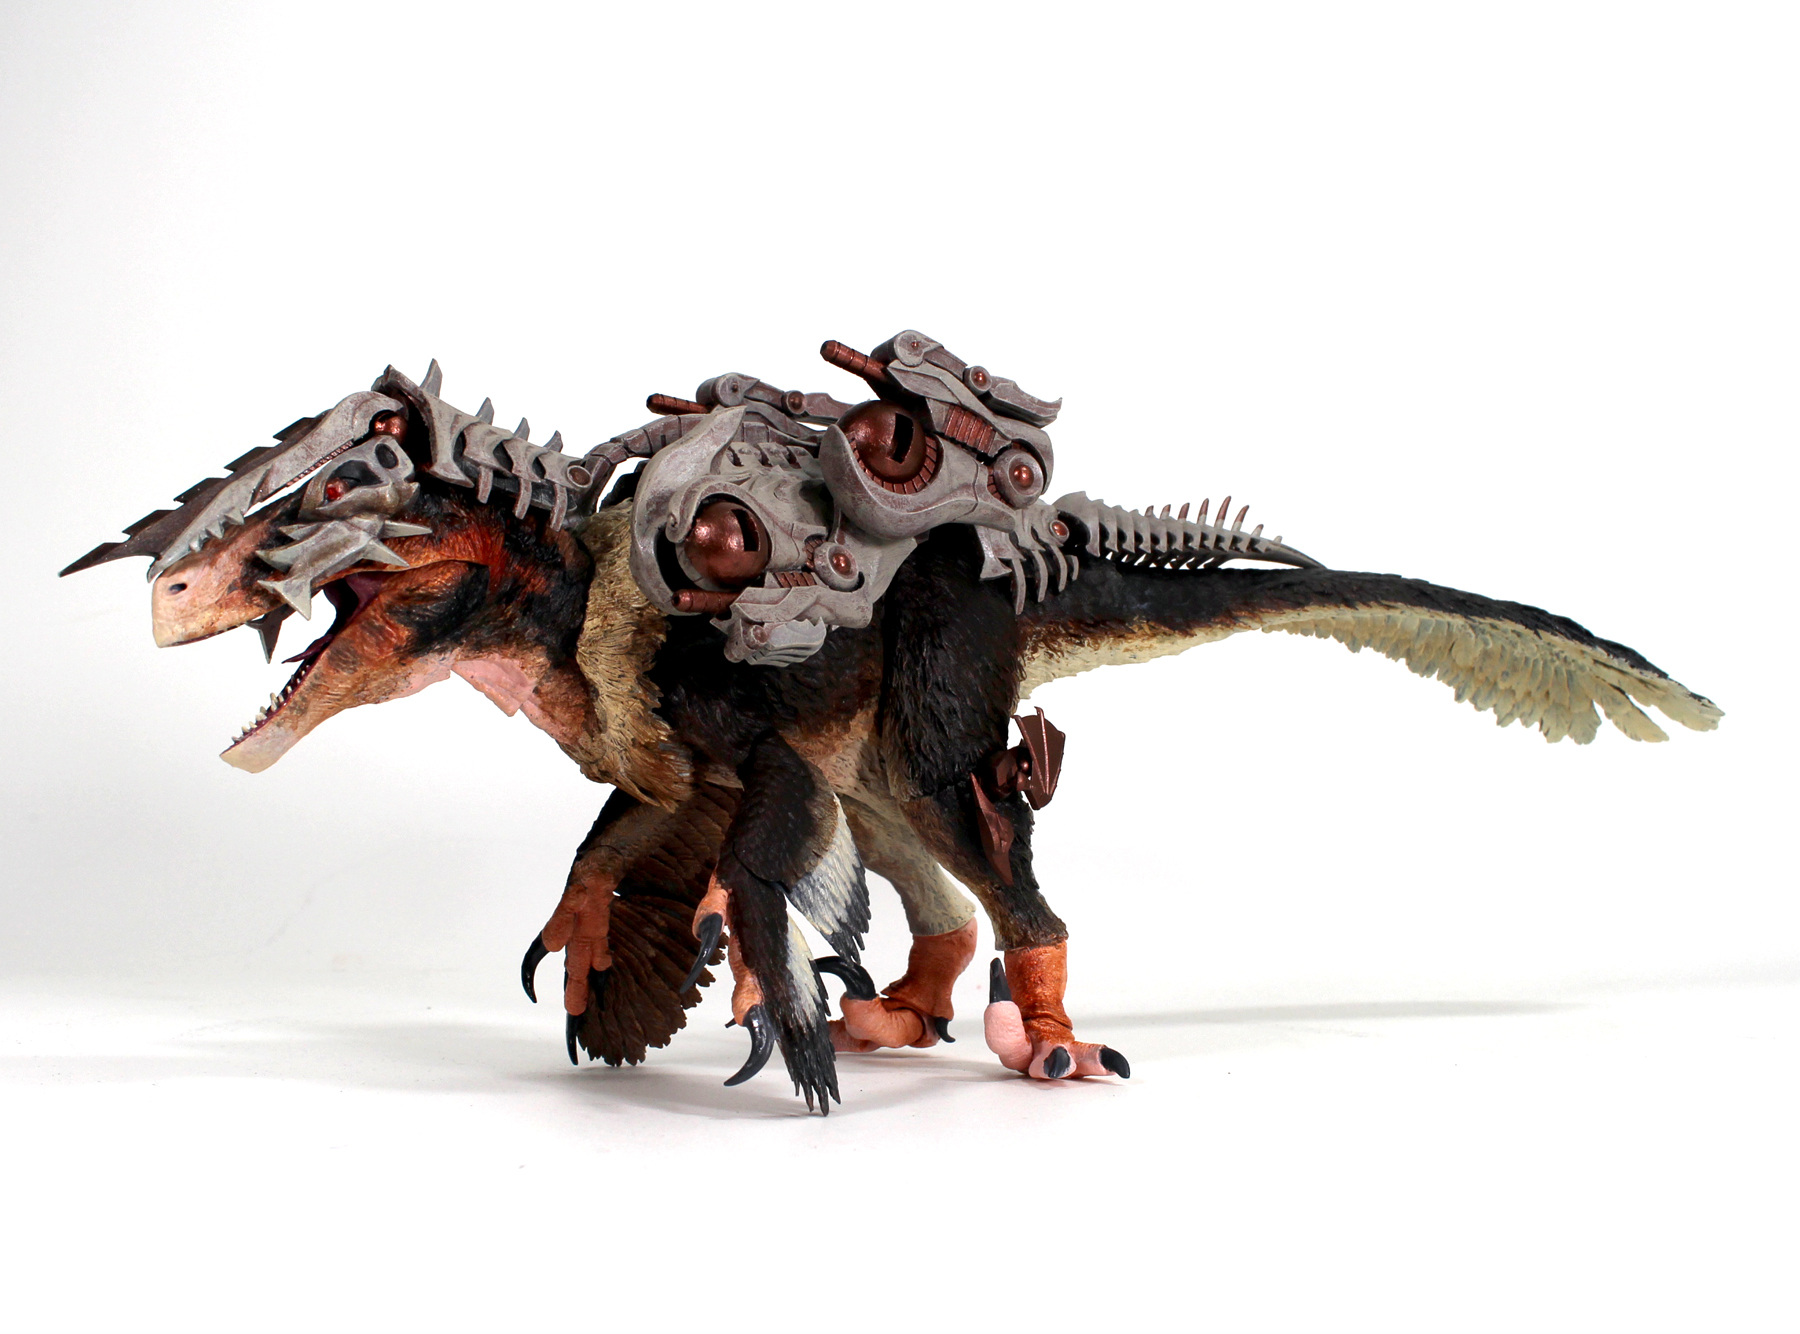 Cyberzoic: First fully painted armored dinosaurs revealed